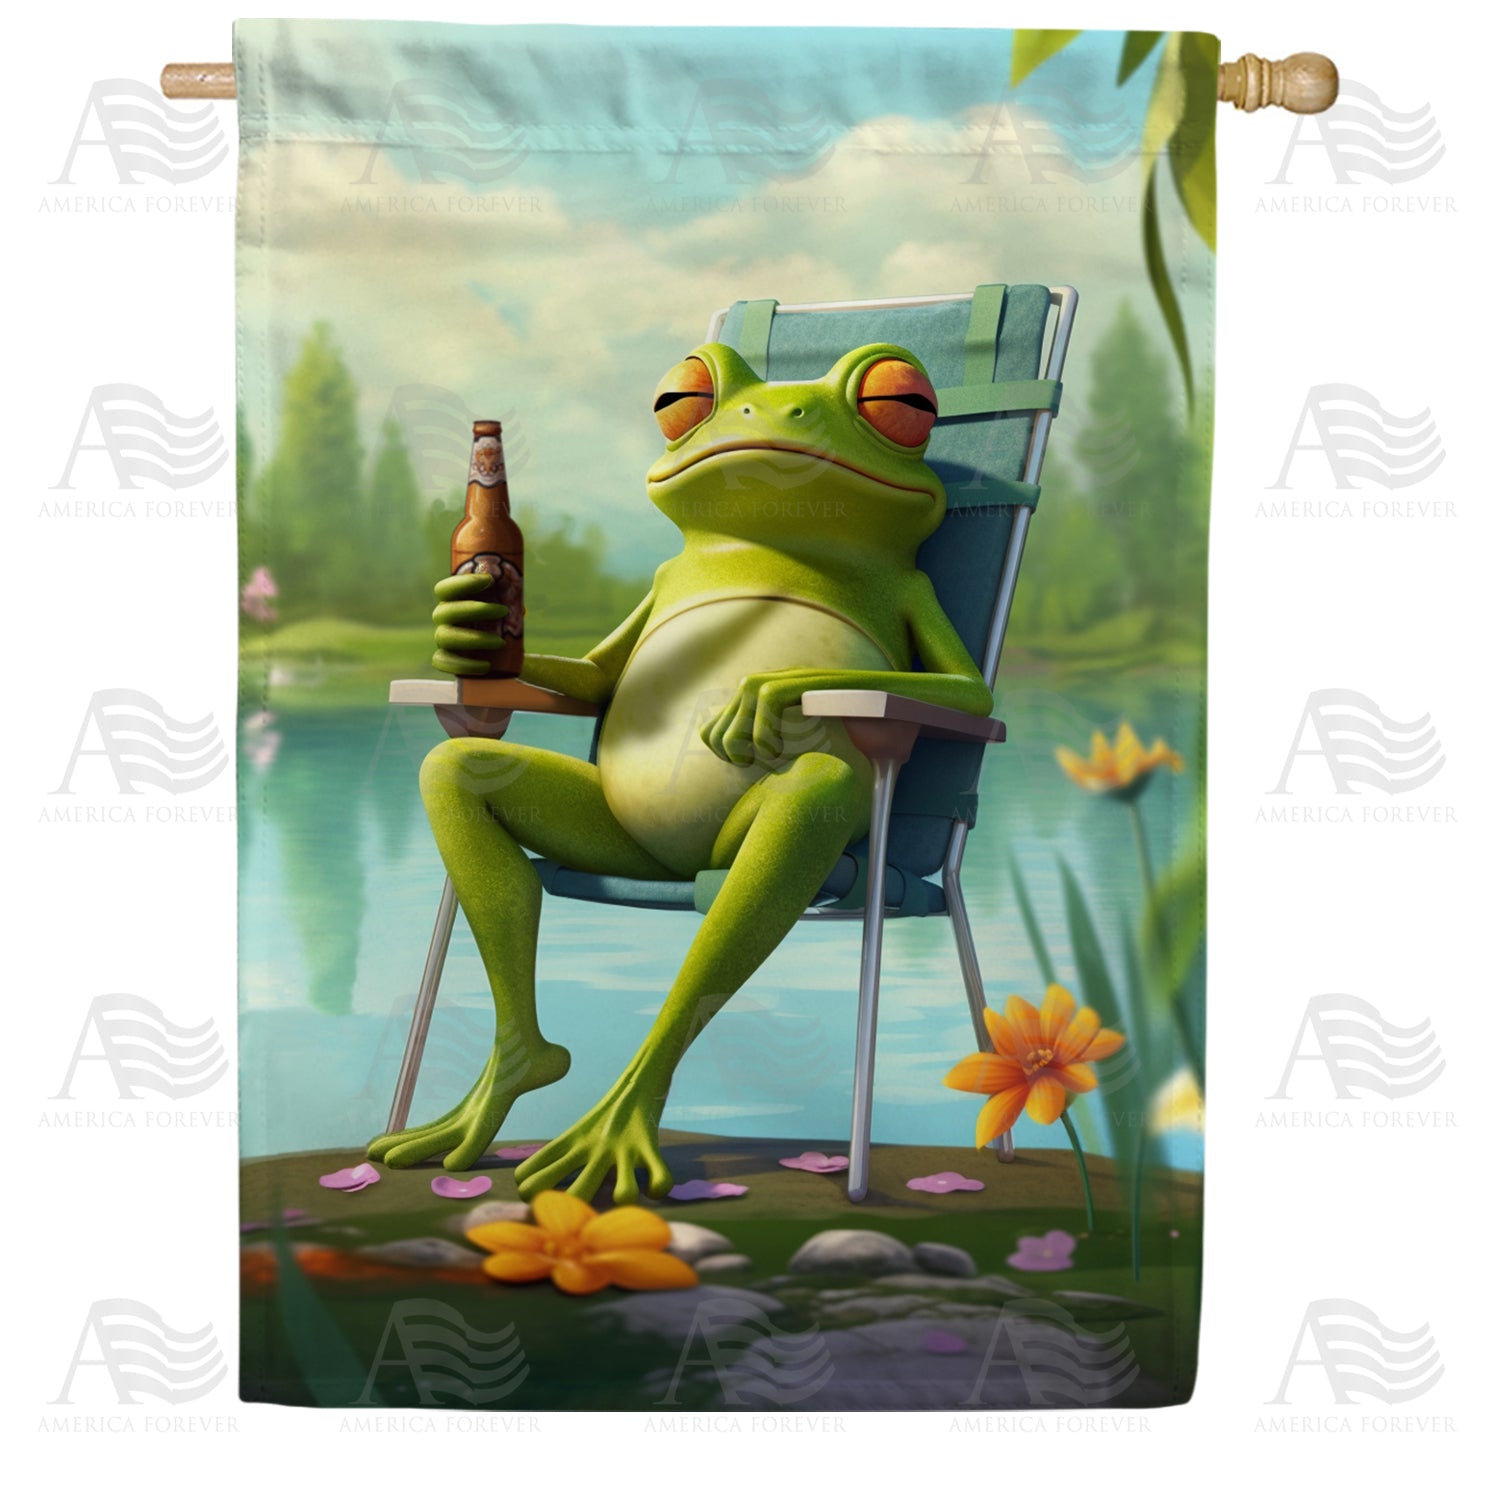 Frog on Toilet Shower Curtain